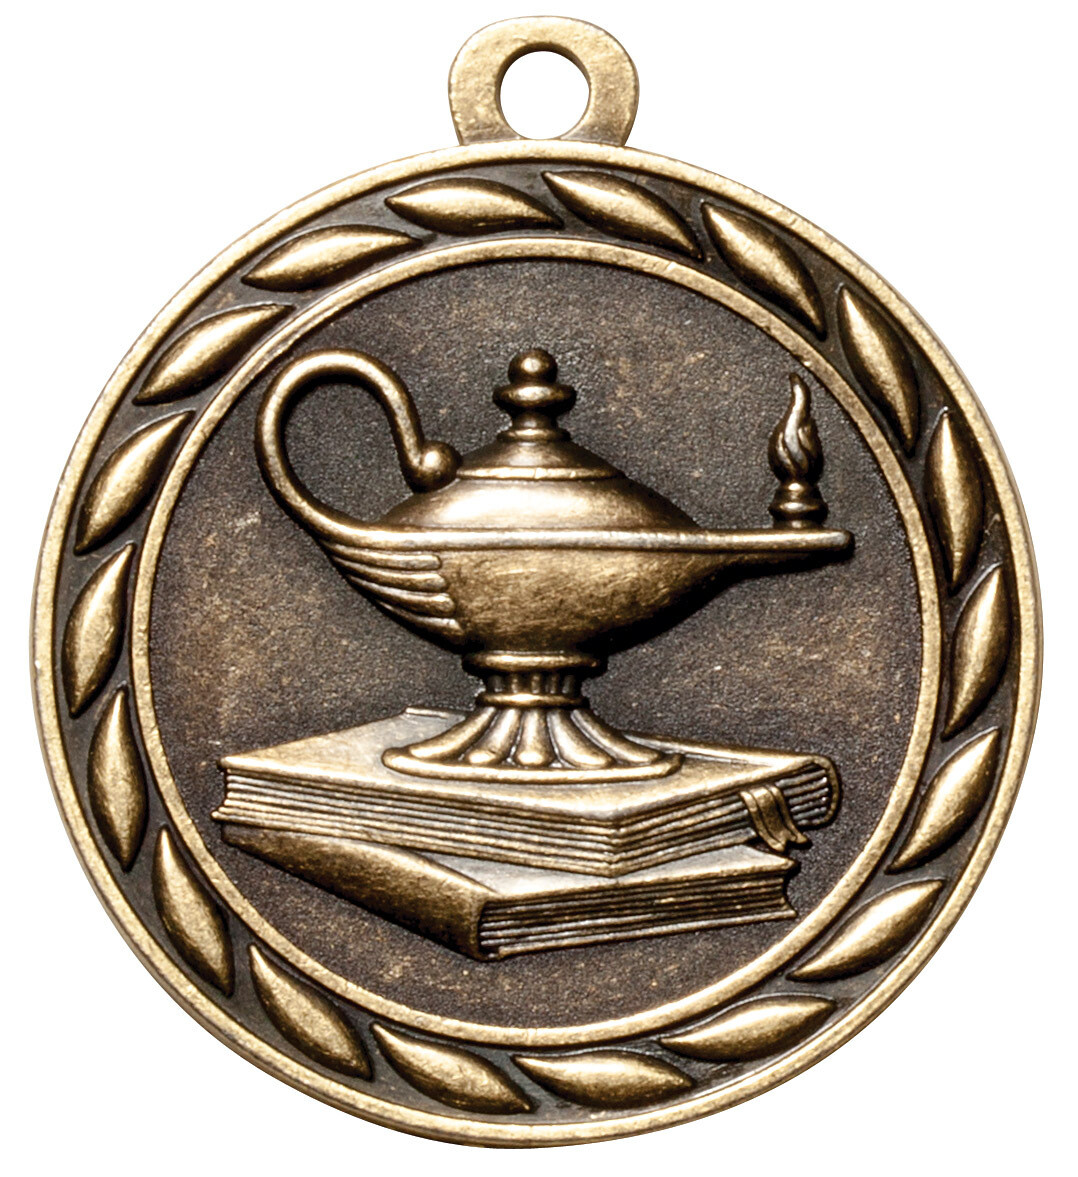 Scholastic Medal Series
LAMP OF KNOWLEDGE